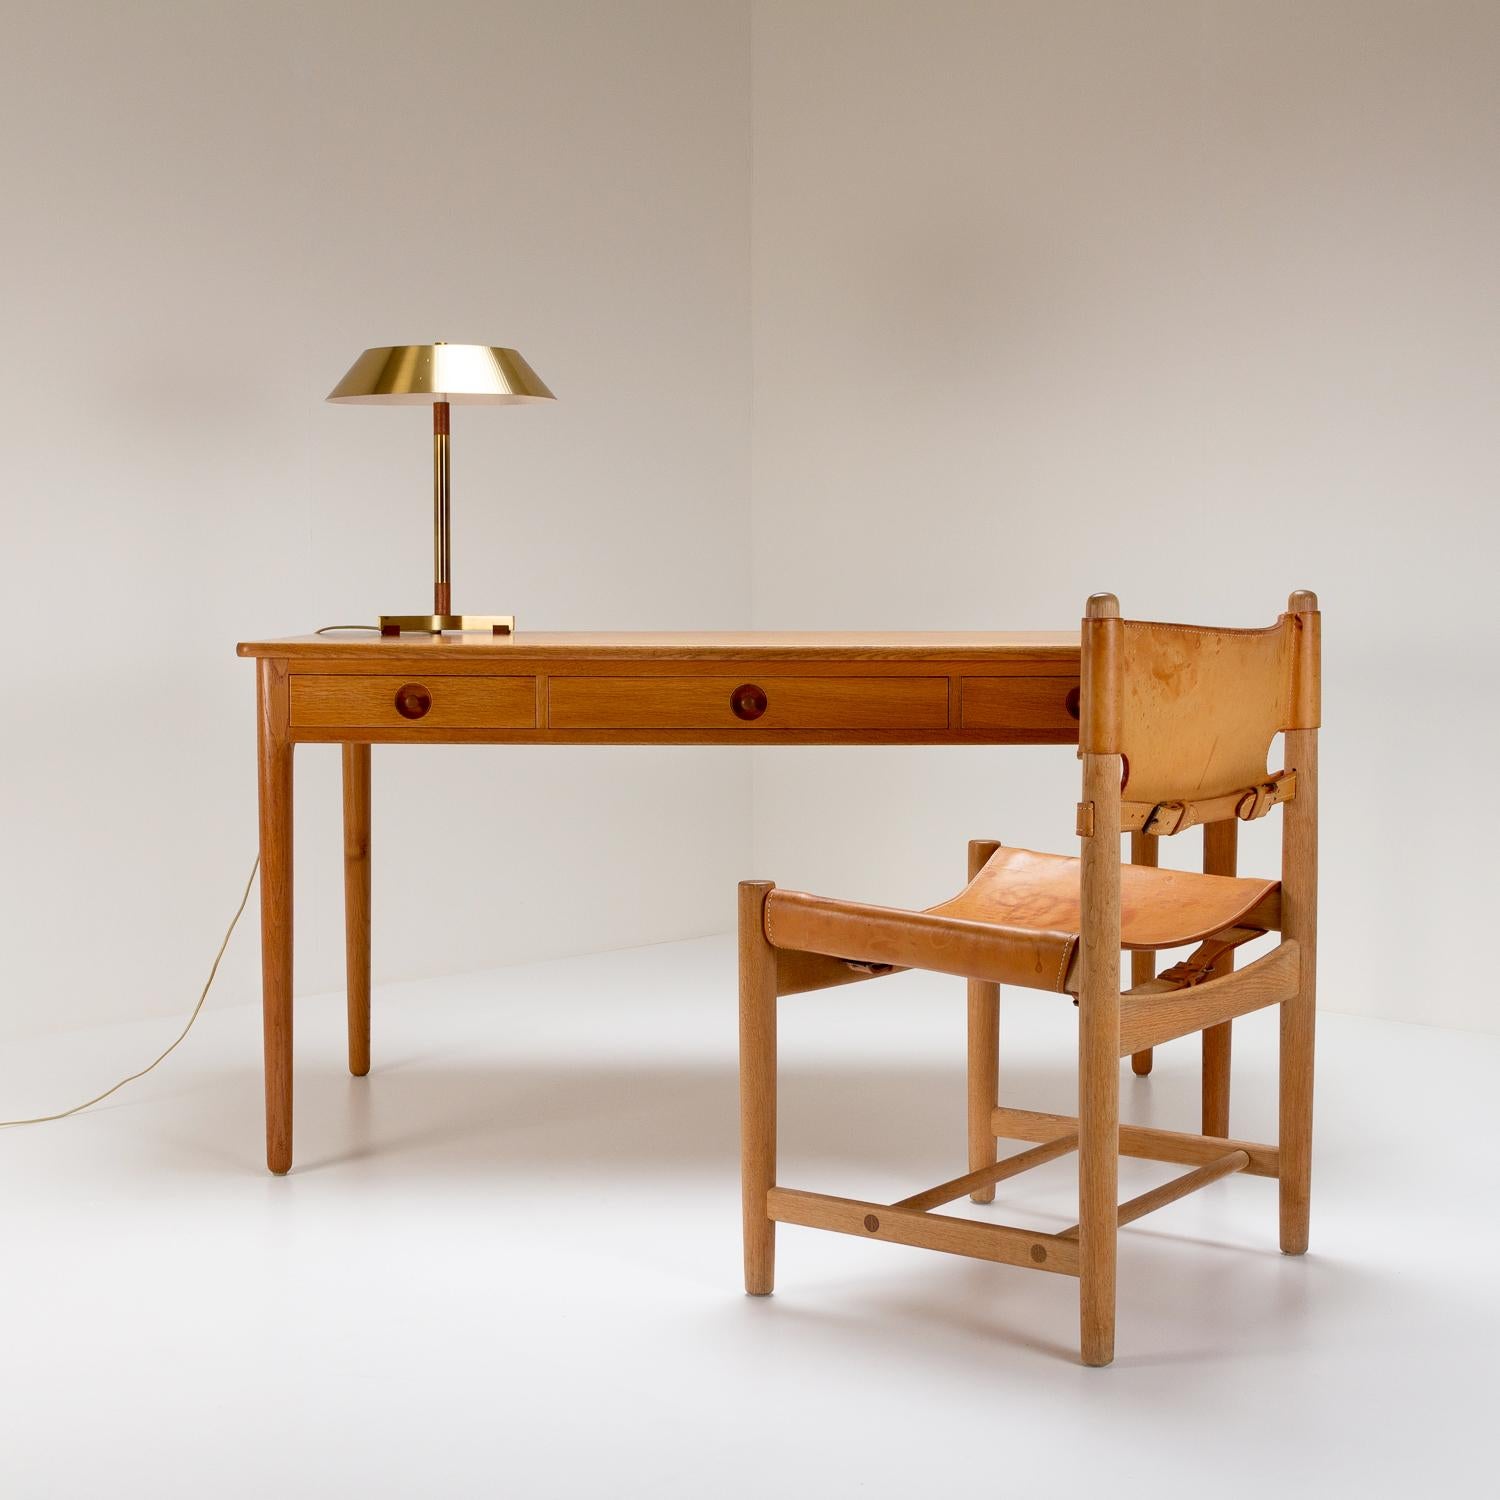 A solid oak writing desk designed by Hans Wegner and made by master cabinetmaker Andreas Tuck in Denmark in the 1950s. Excellent quality as expected from Wegner and Tuck, one of Denmark’s greatest mid-century working partnerships. There is a very